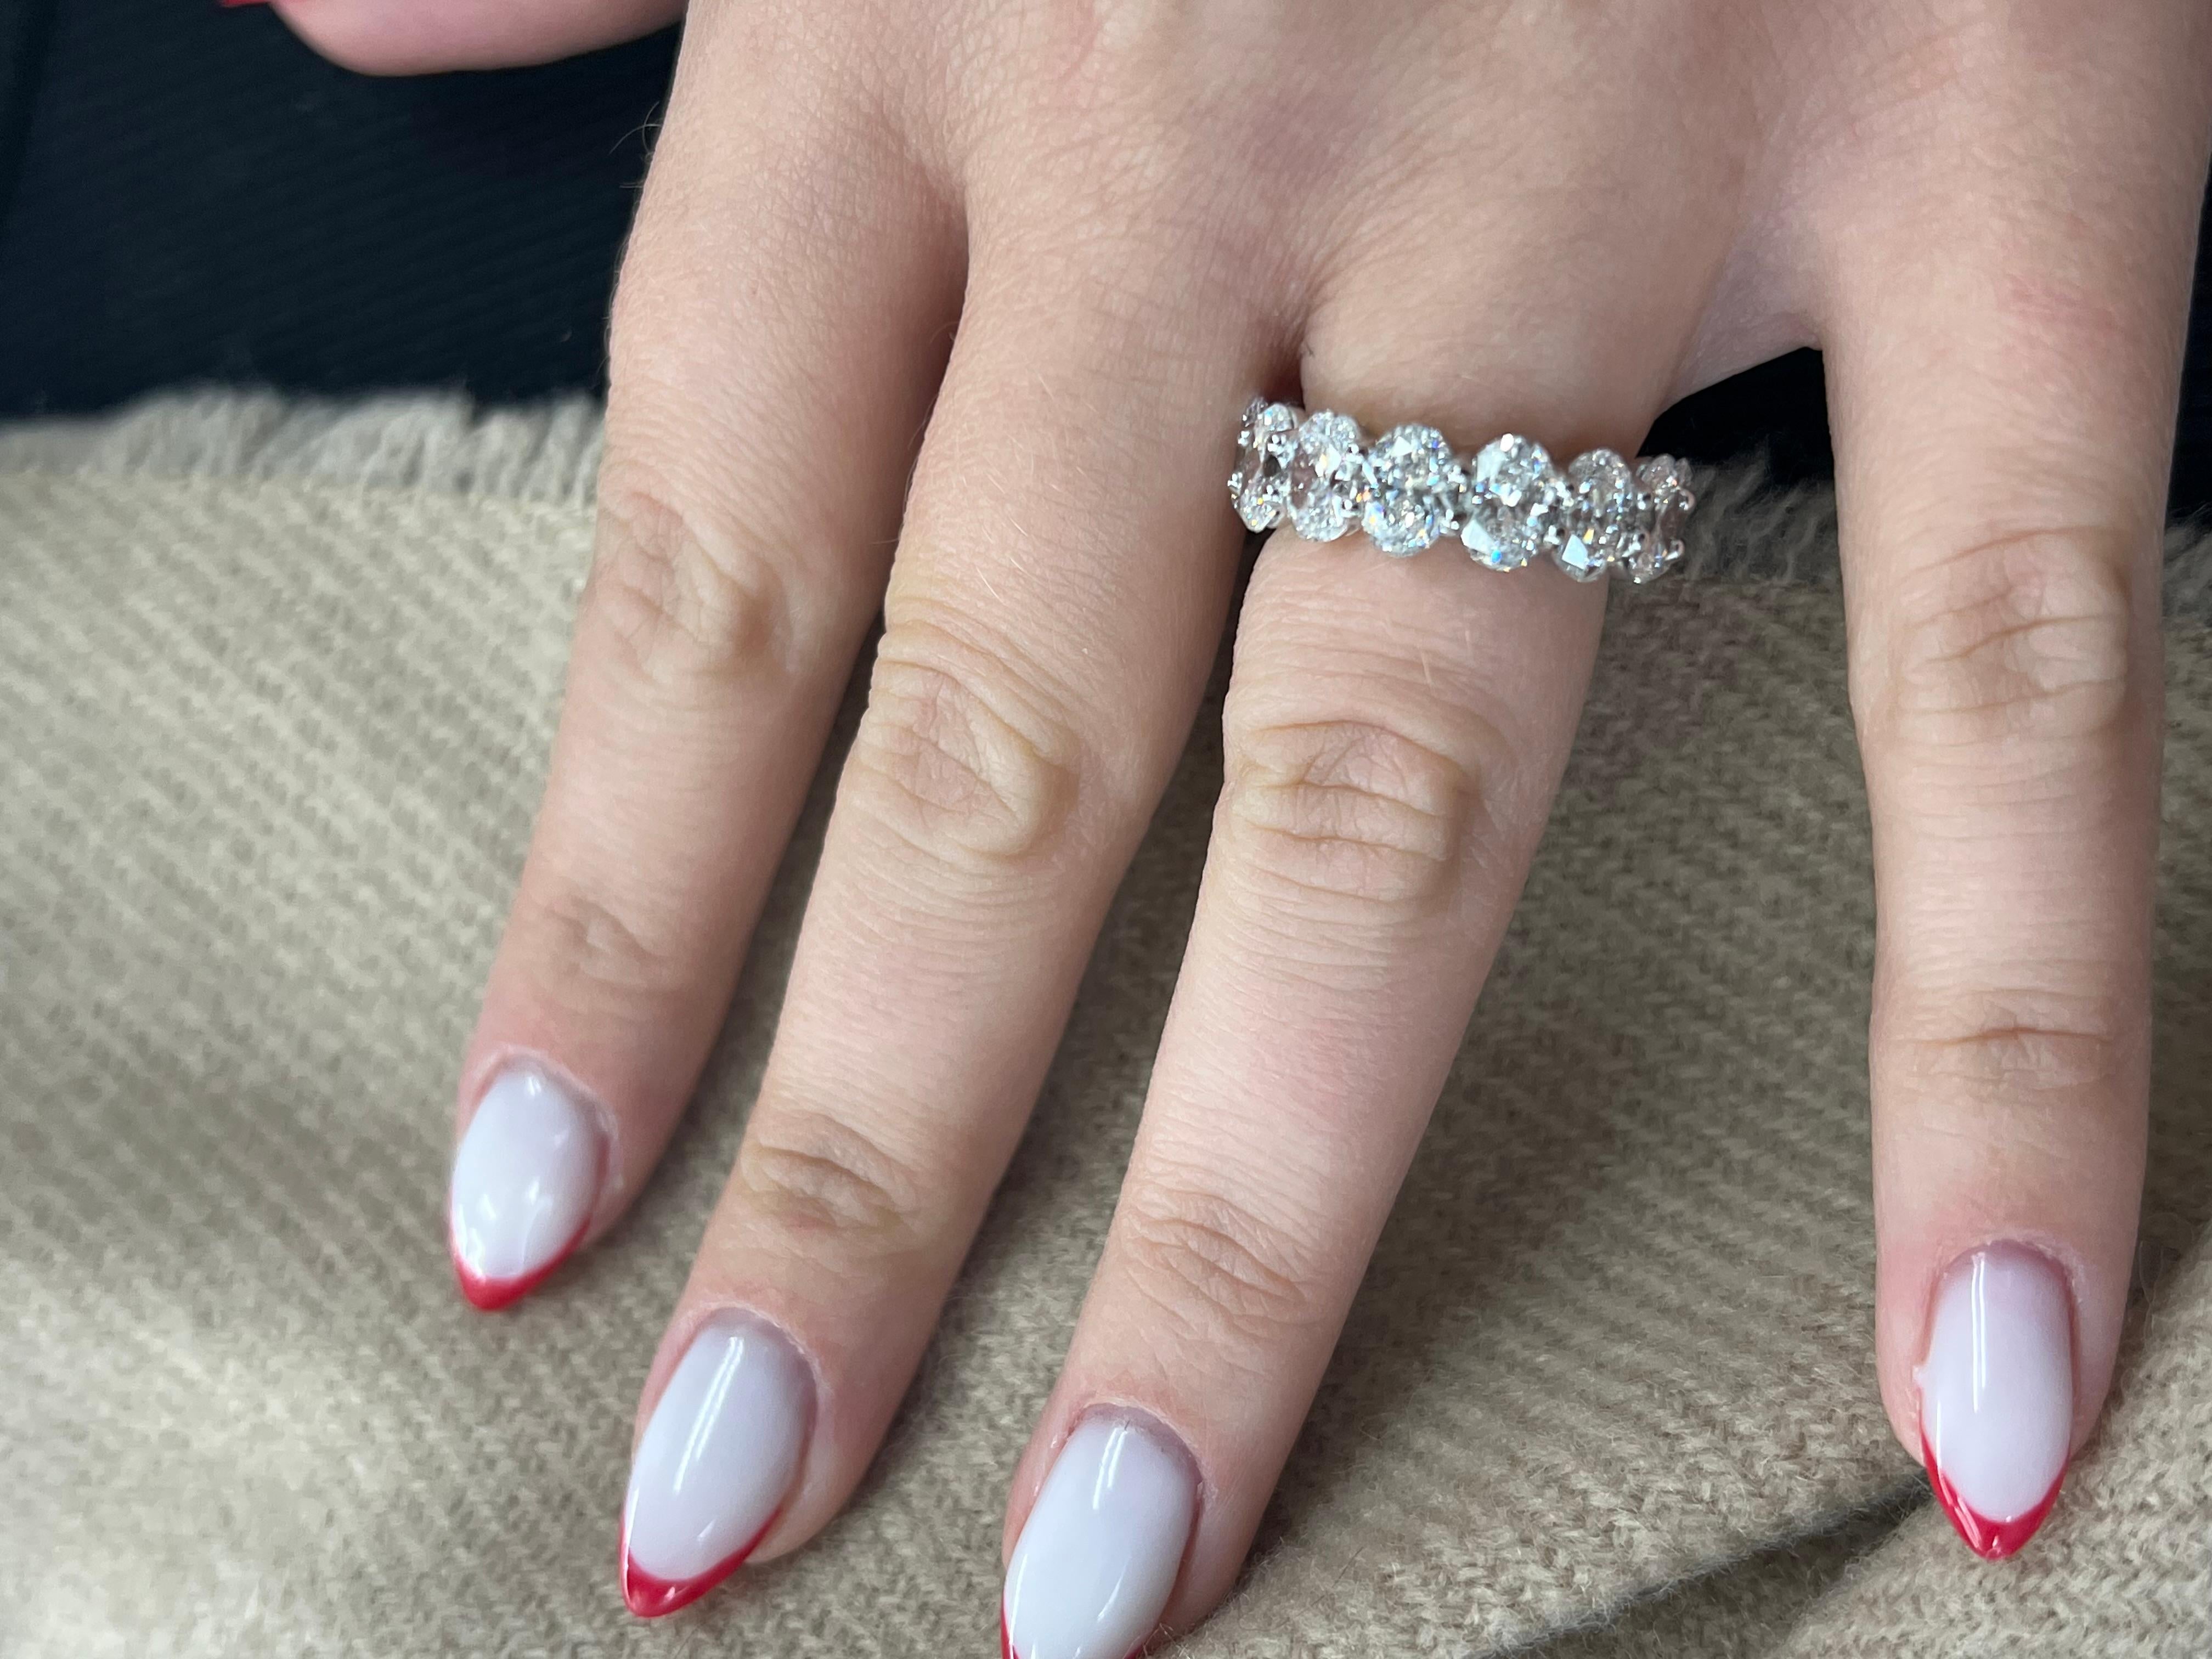 Introducing our exquisite 5.5 Carat Oval Cut Diamond Eternity Band crafted in 18K White Gold, designed to take your breath away. The 5.5 Carat Diamonds used in this eternity band are of exceptional quality and sparkle with incredible fire and